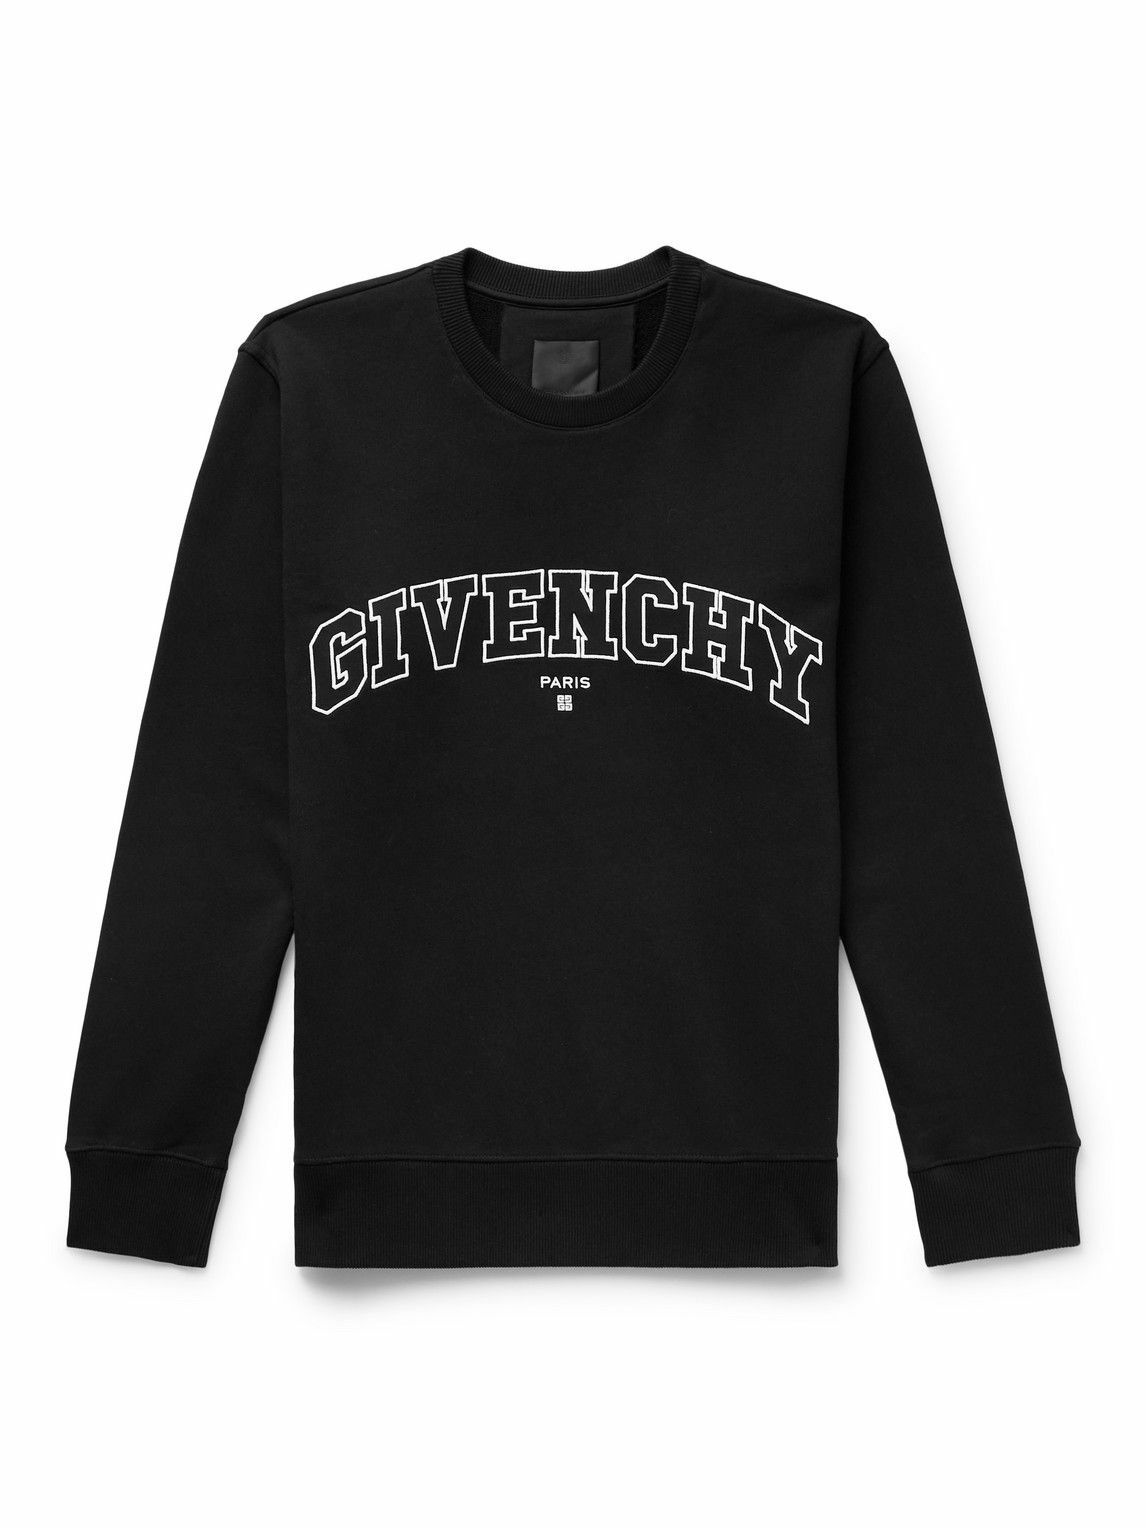 Givenchy - Logo-Embroidered Cotton-Jersey Sweatshirt - Black Givenchy